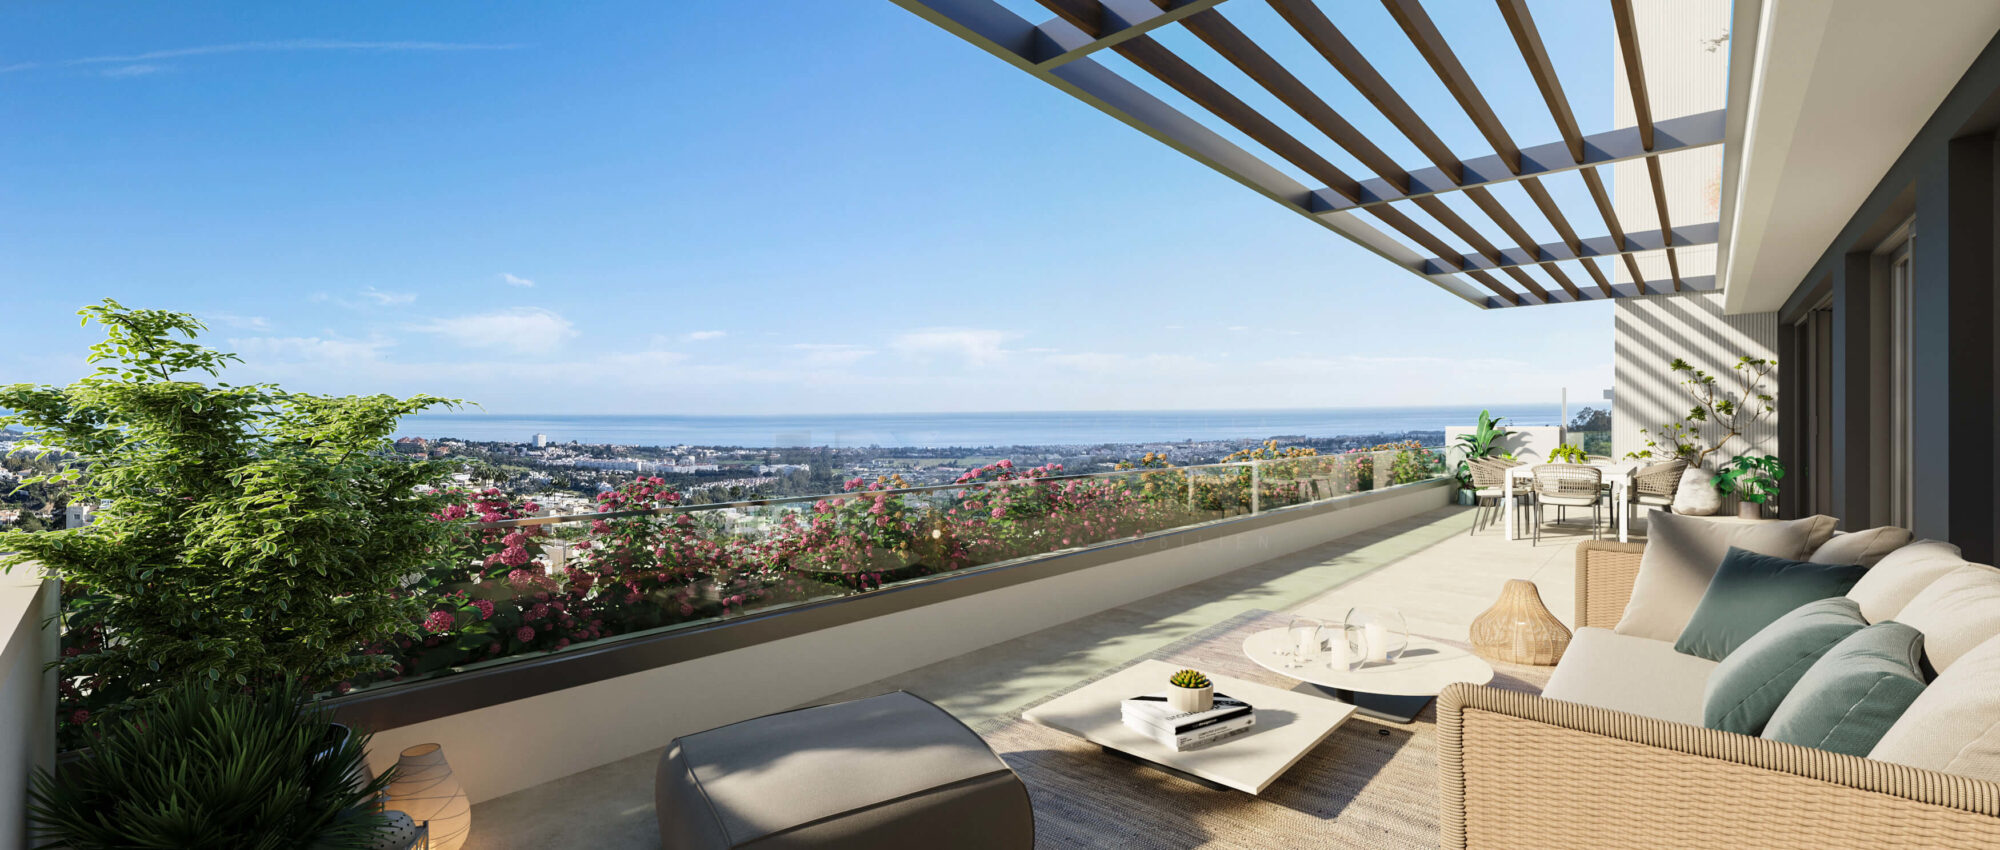 Brand new penthouse with panoramic sea views in Marbella